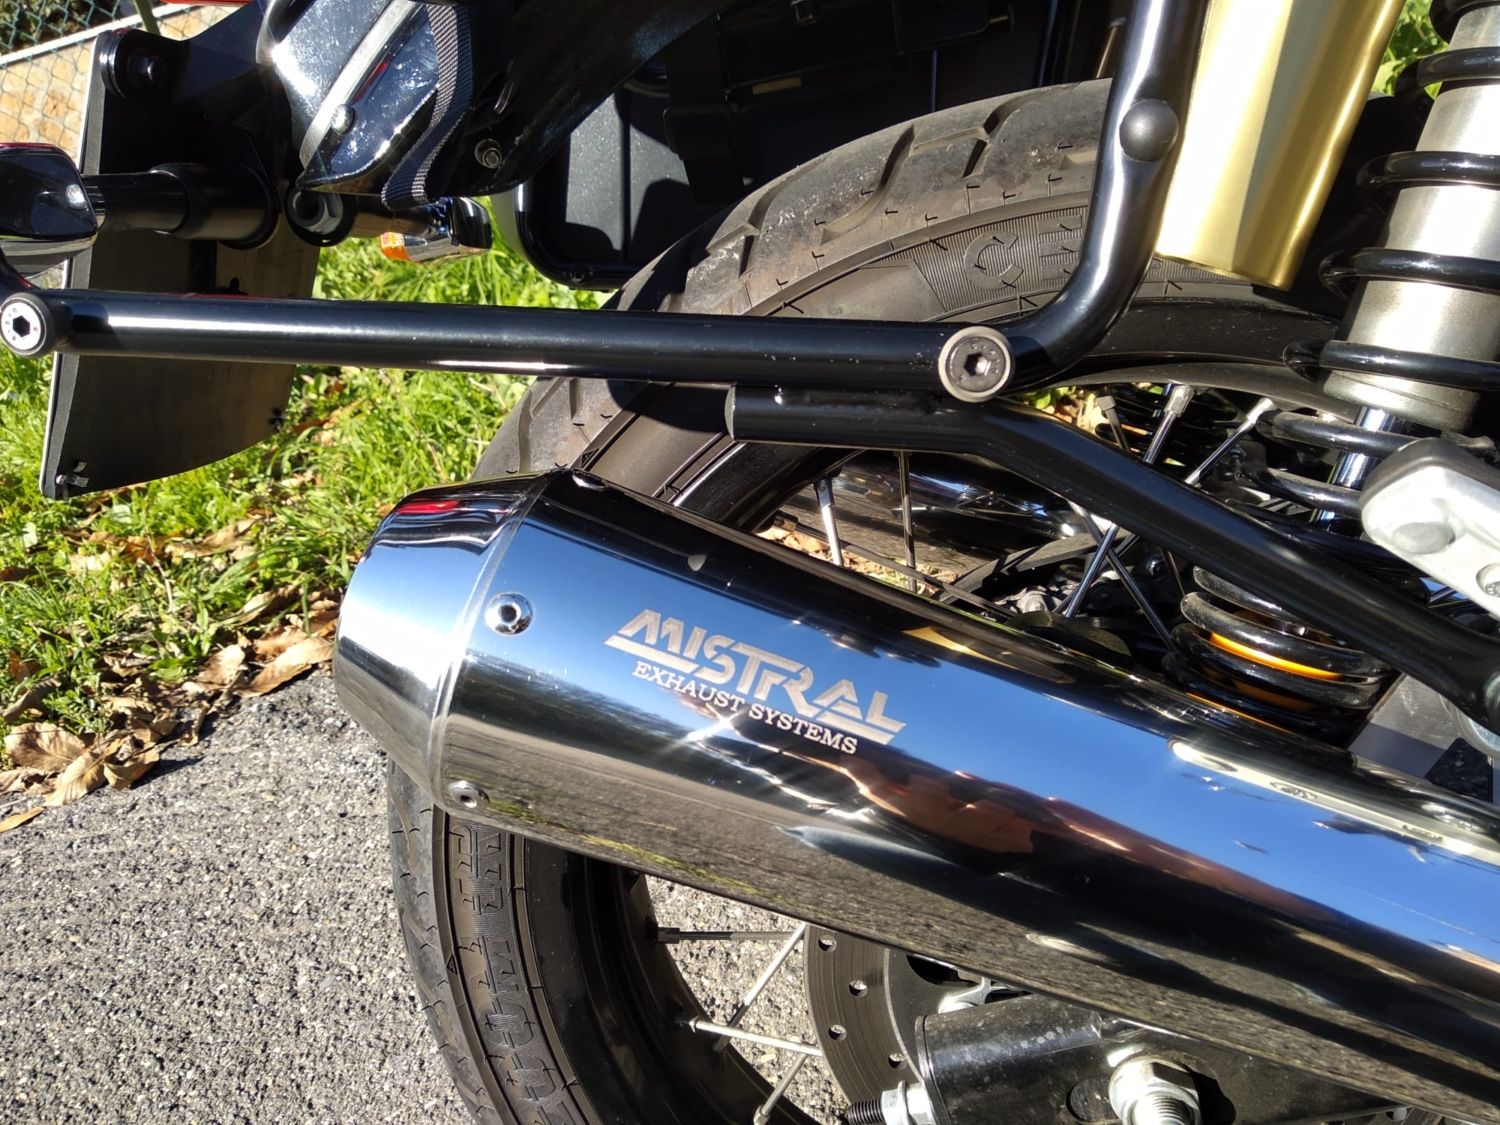 Polished exhaust Royal Enfield Continental Gt 650/Interceptor